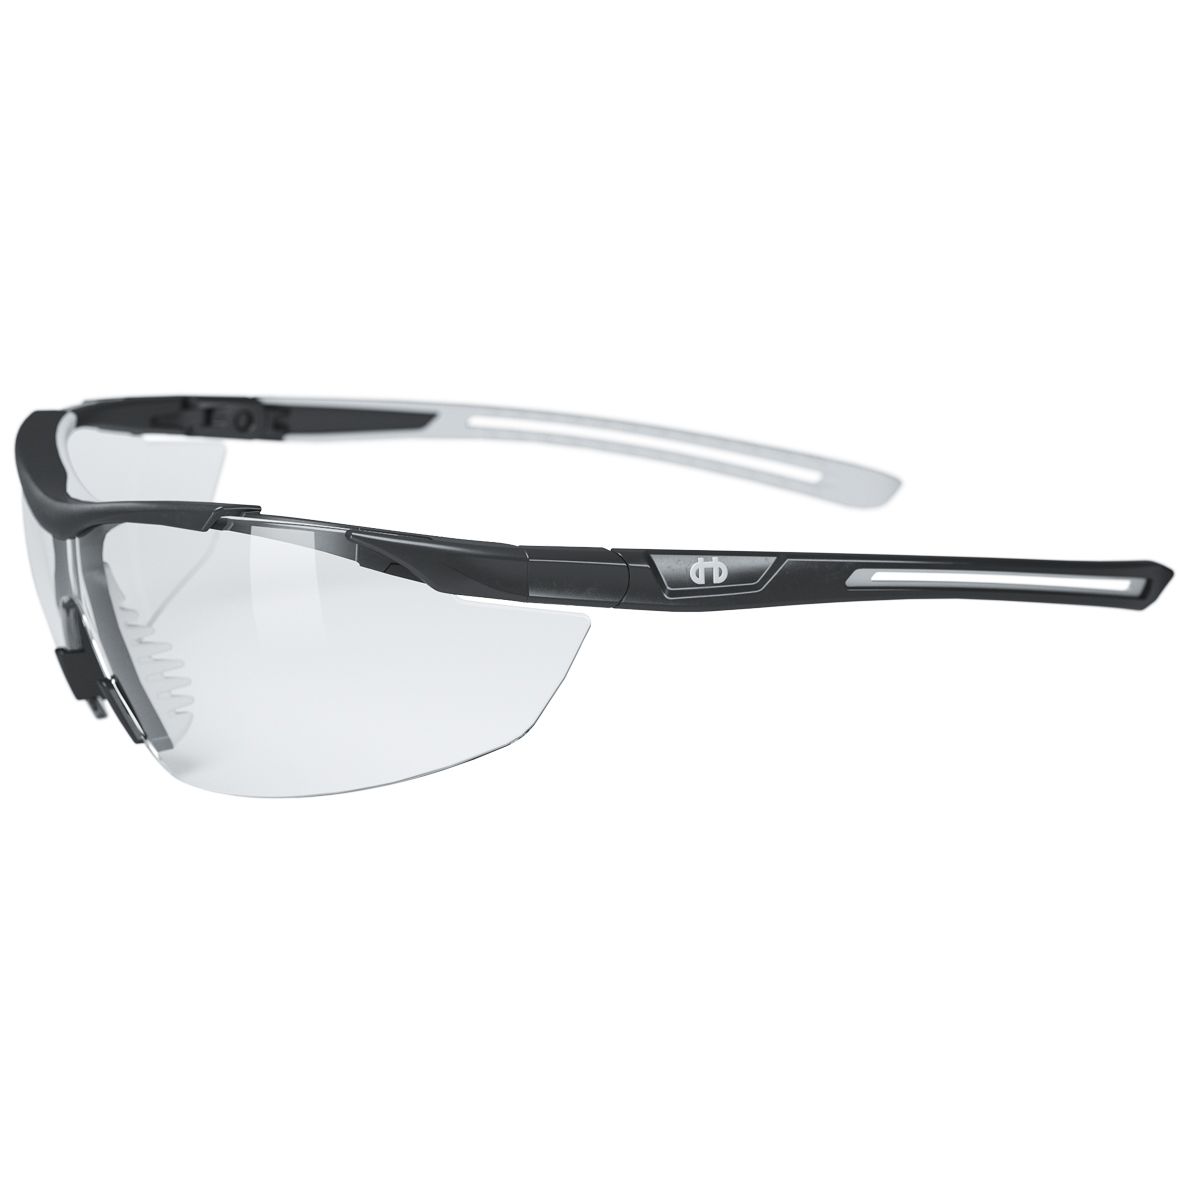 Hellberg Argon safety goggles - scratch & fog resistant - for construction, crafts & industry - EN 166 - clear/black-white